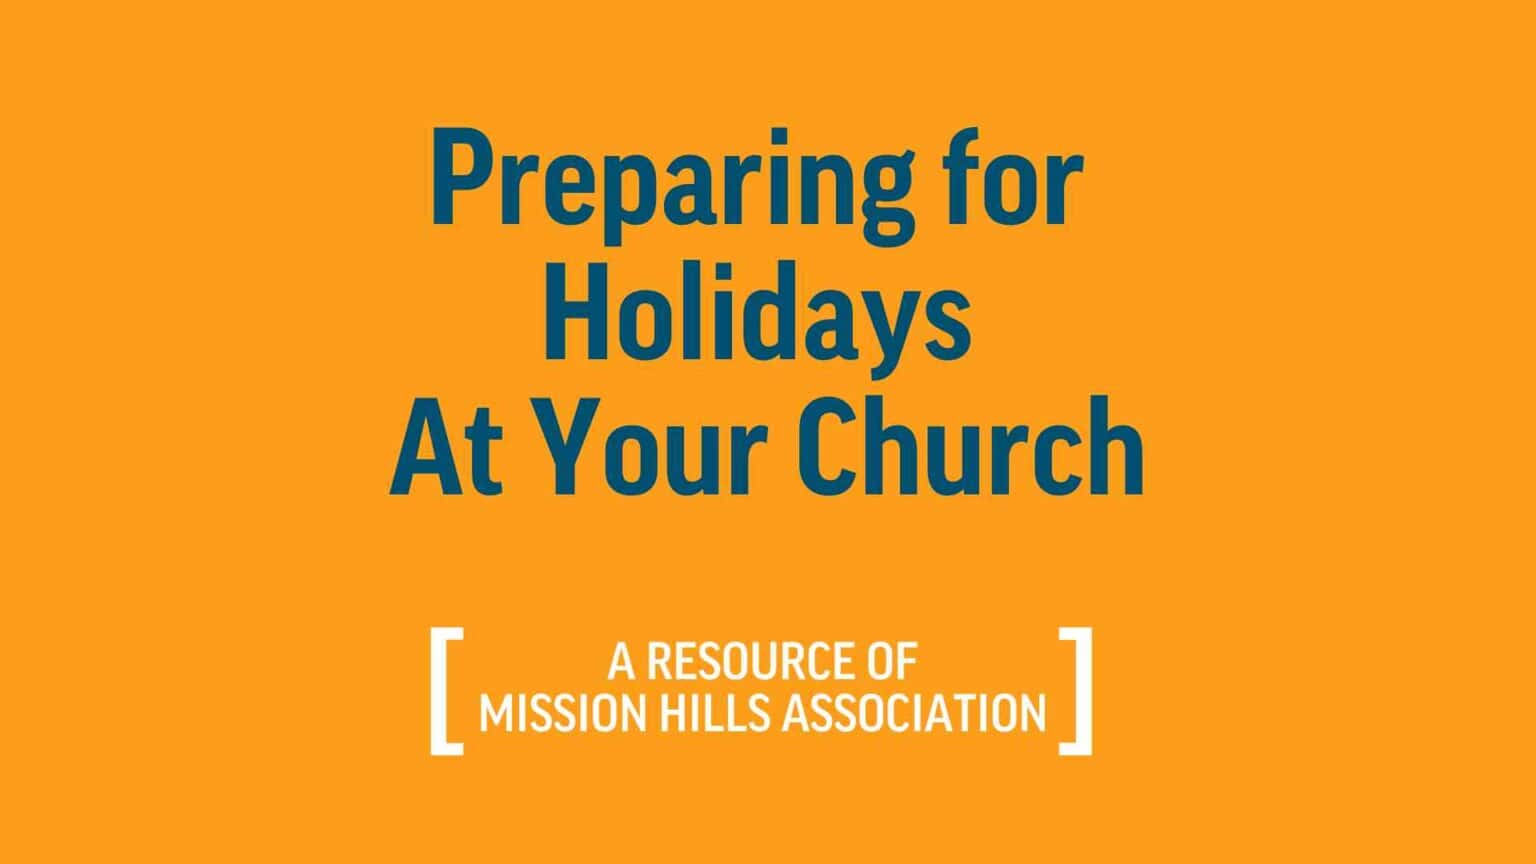 Preparing for Holidays at Your Church